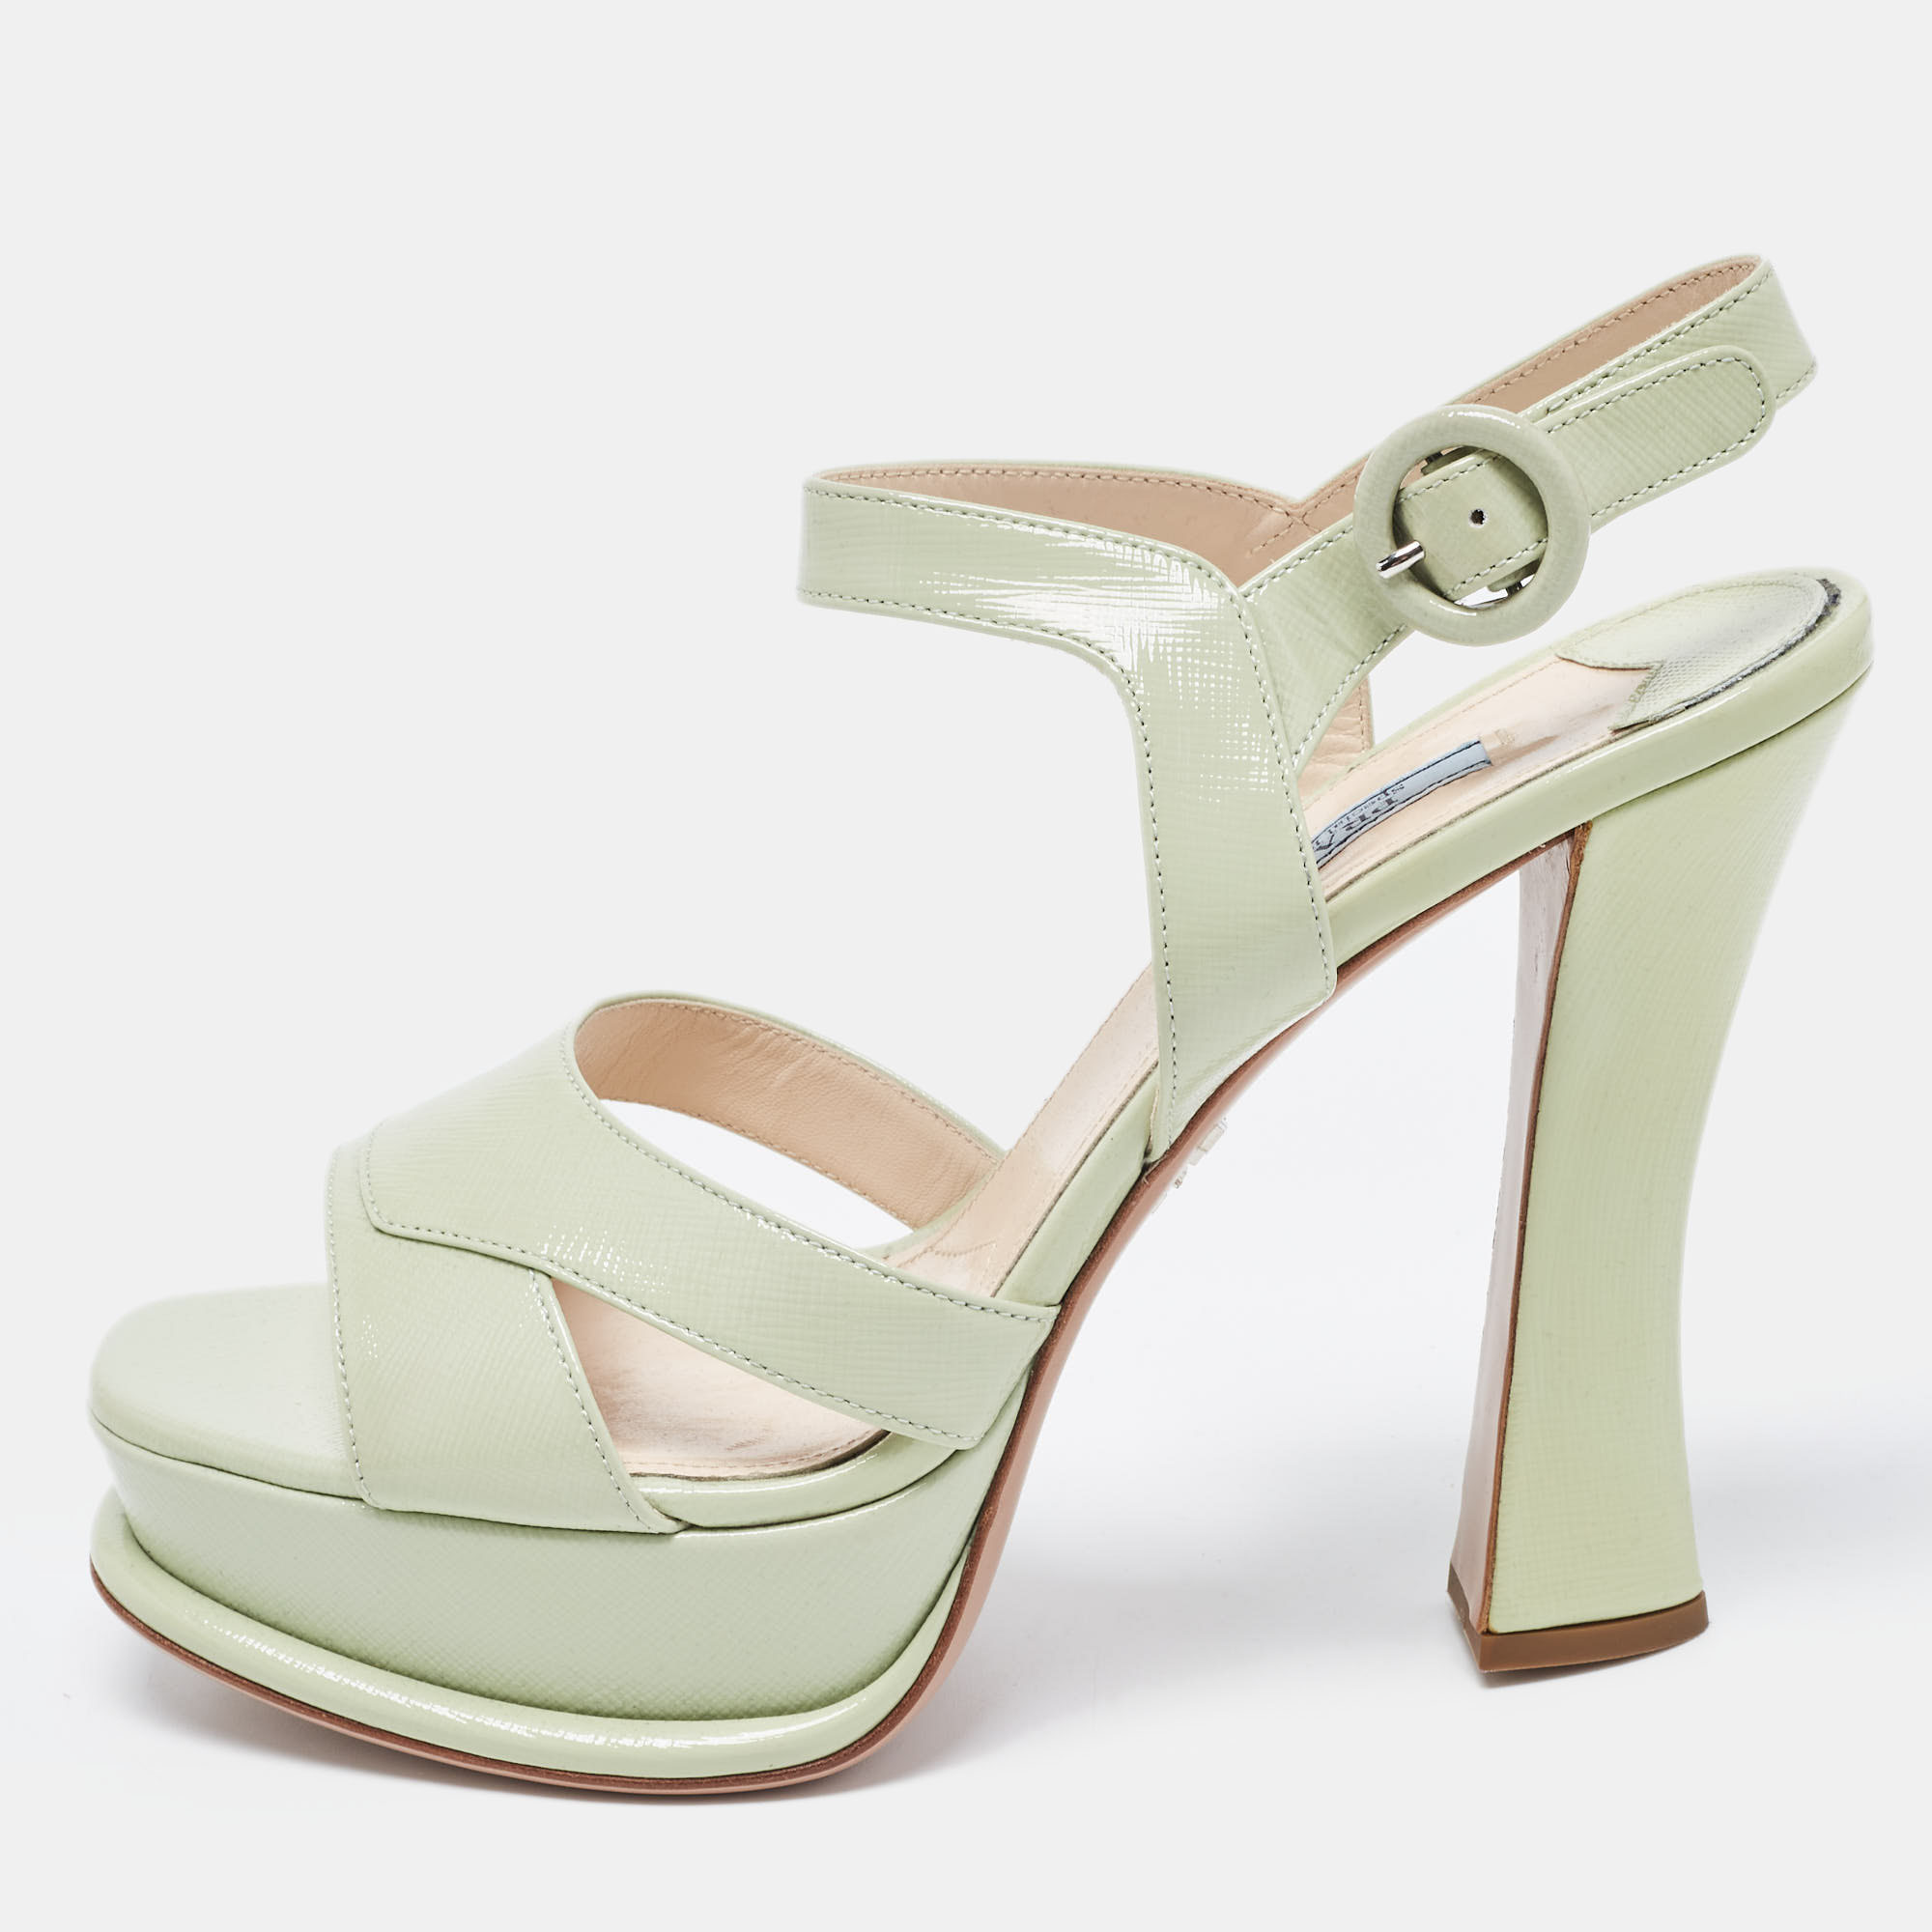 Pre-owned Prada Mint Green Saffiano Leather Platform Ankle Strap